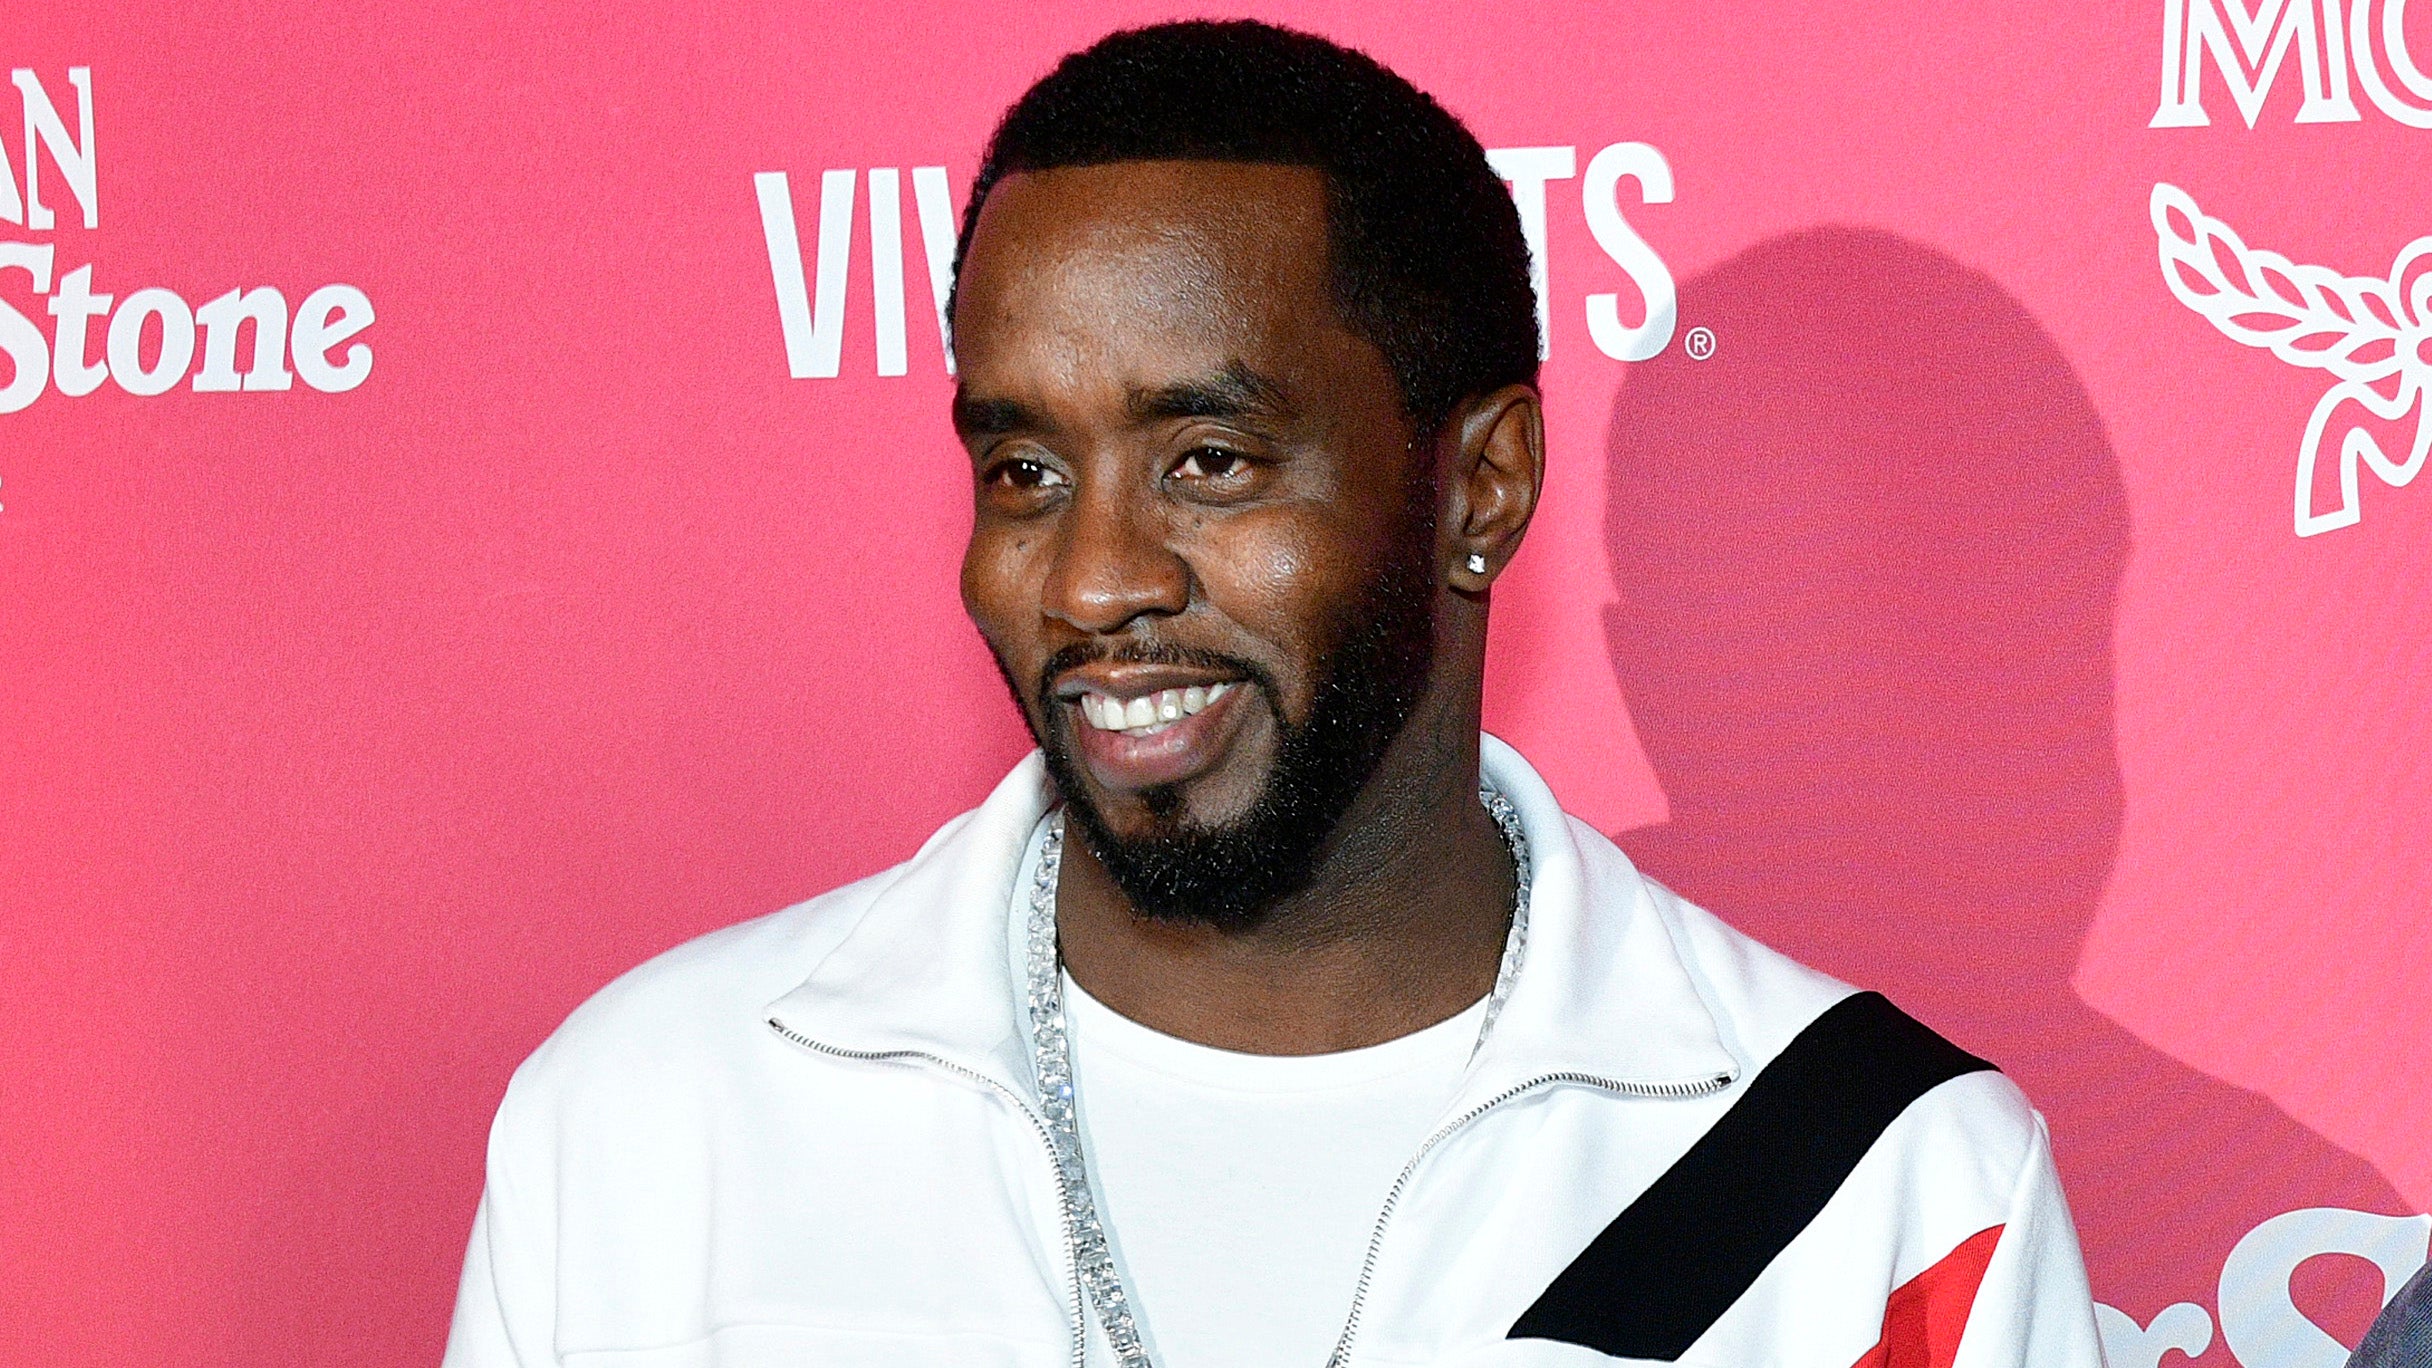 Sean Combs done Diddy it again, goes back to Puff Daddy name